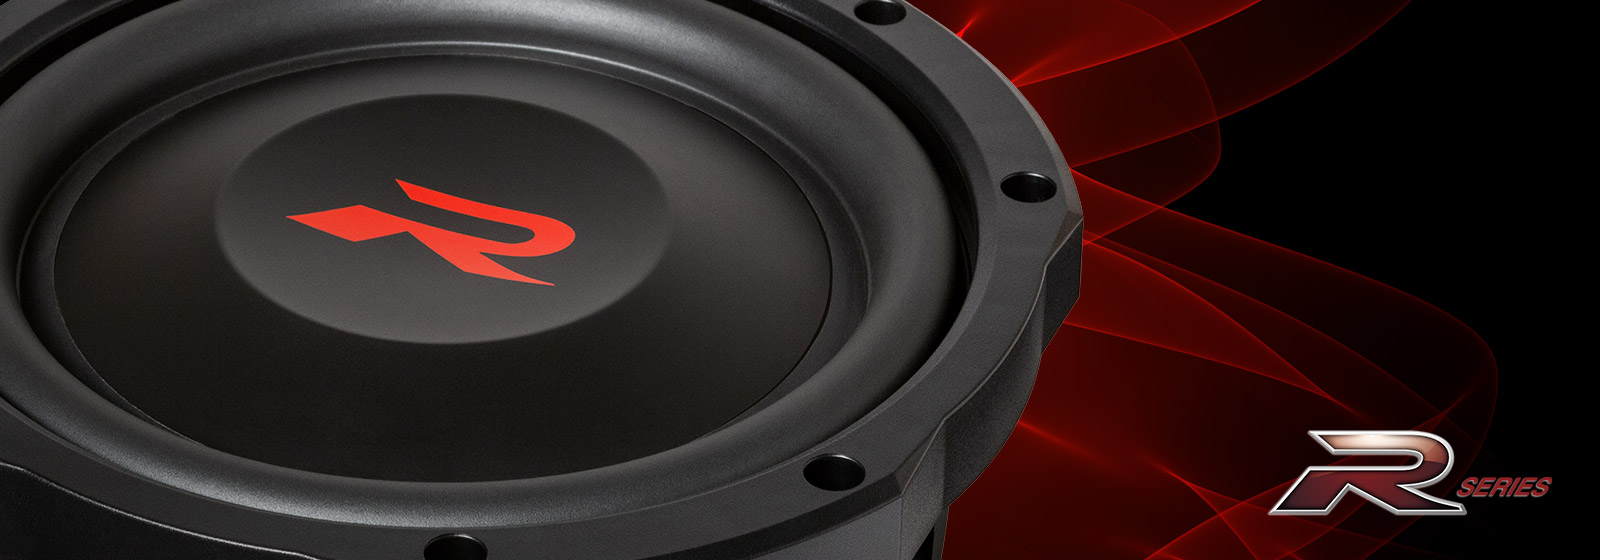 The New R-Series Shallow Subwoofers